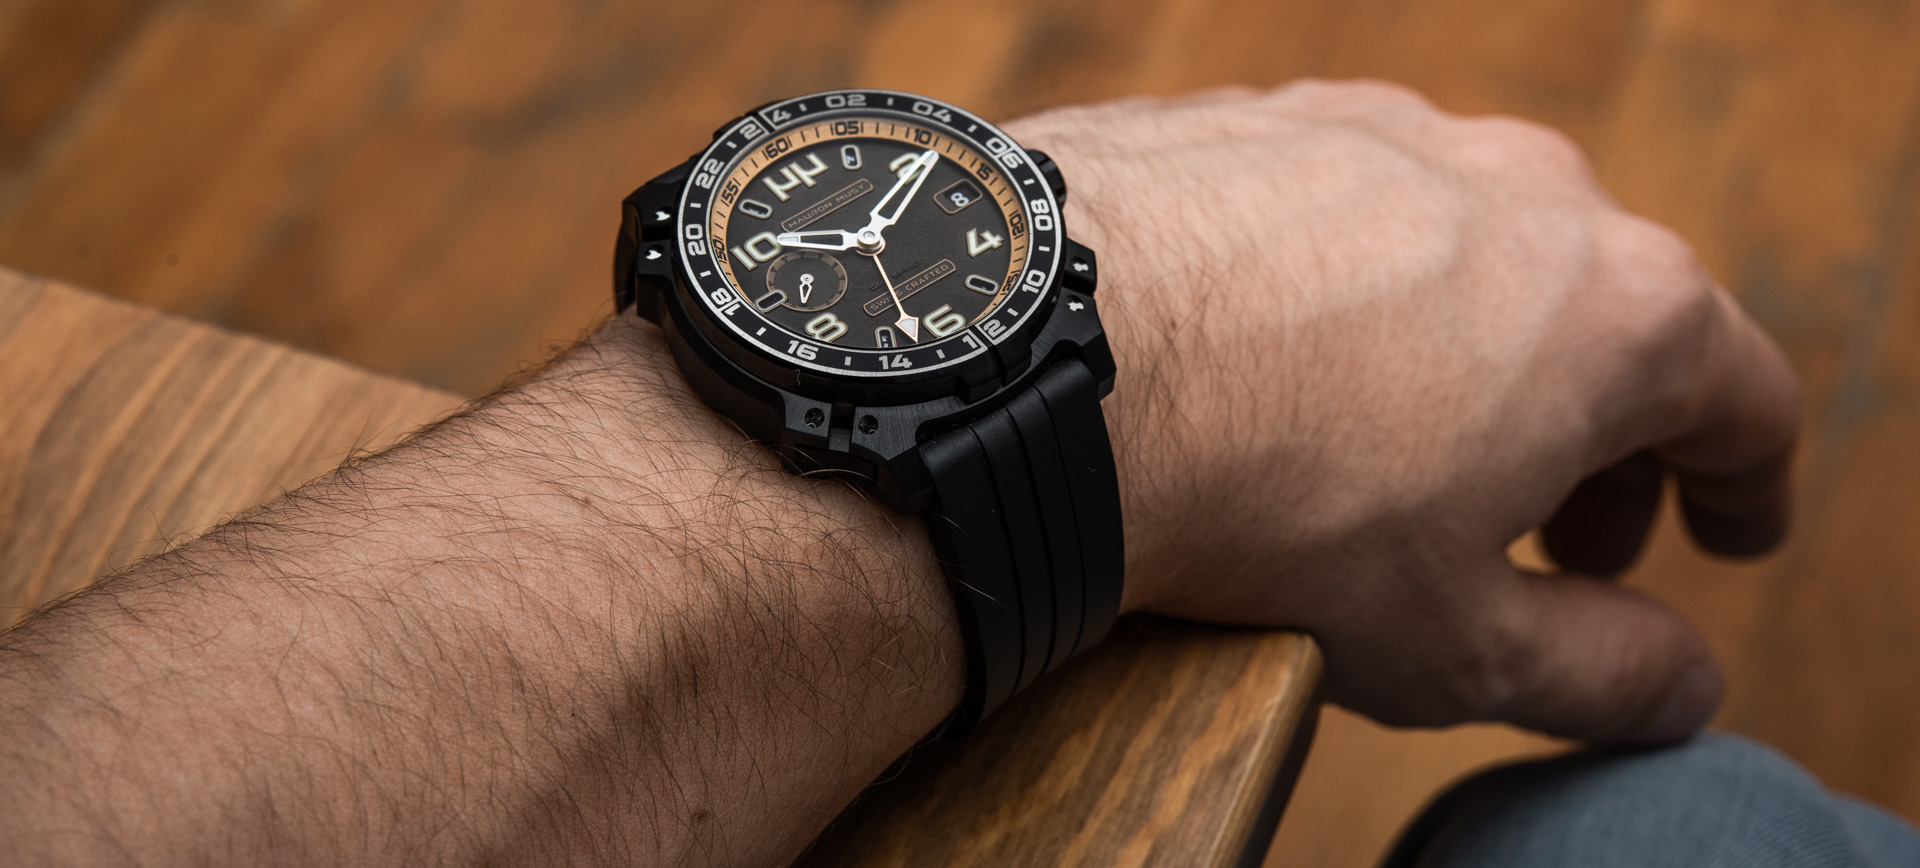 Mauron Musy GMT Sport Watch Reviewed: 100% Swiss, 300M WR Without Gaskets